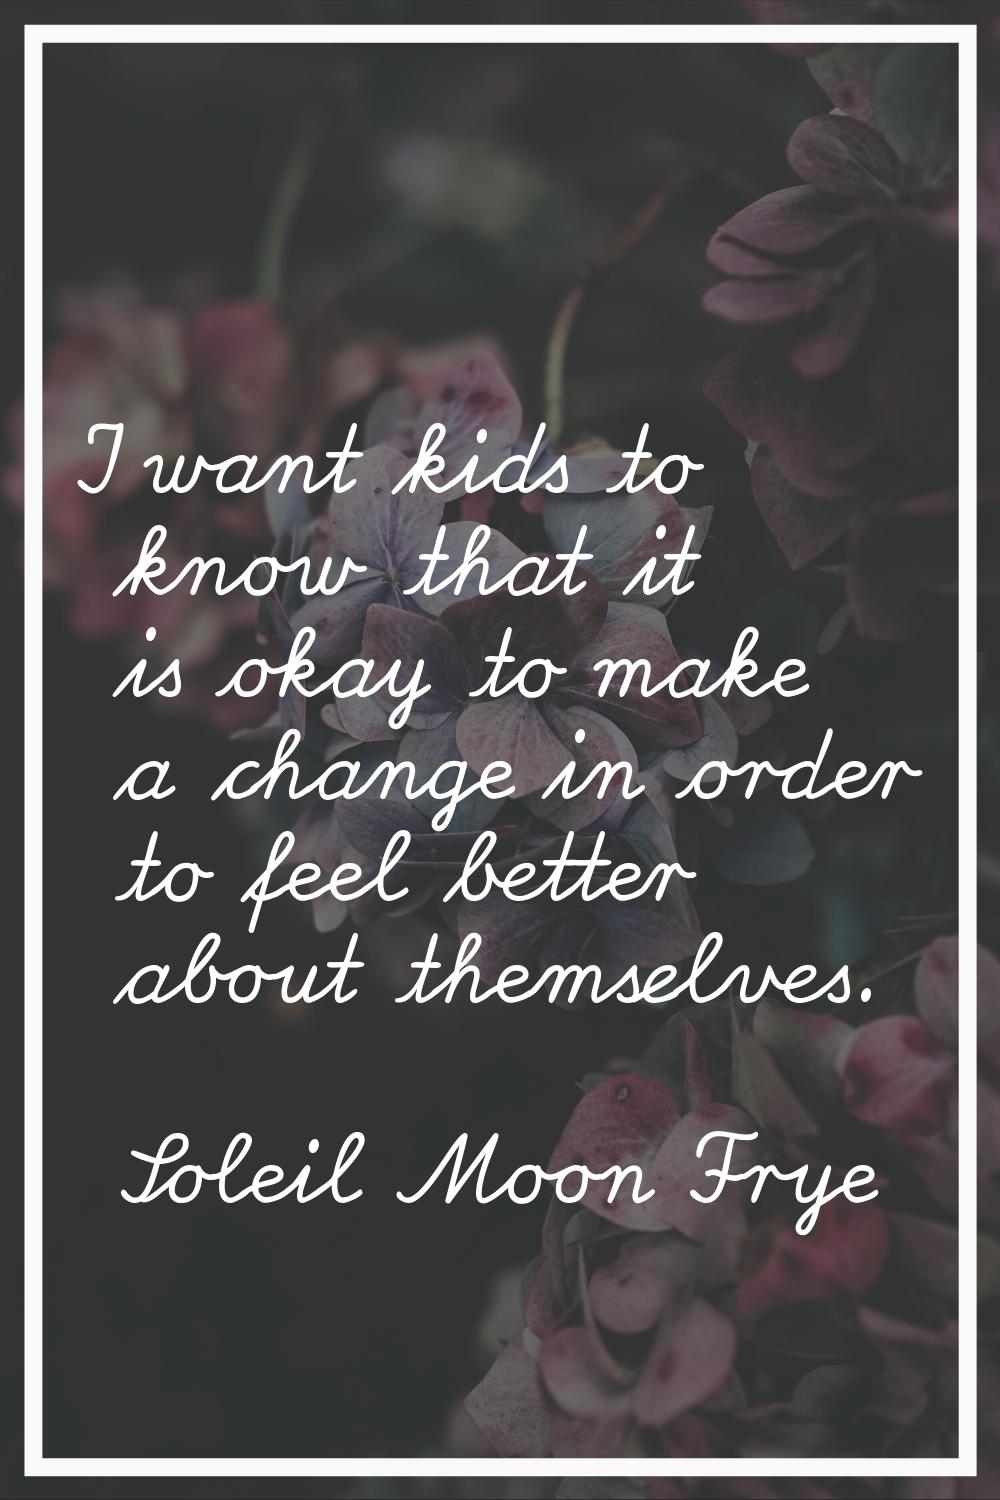 I want kids to know that it is okay to make a change in order to feel better about themselves.